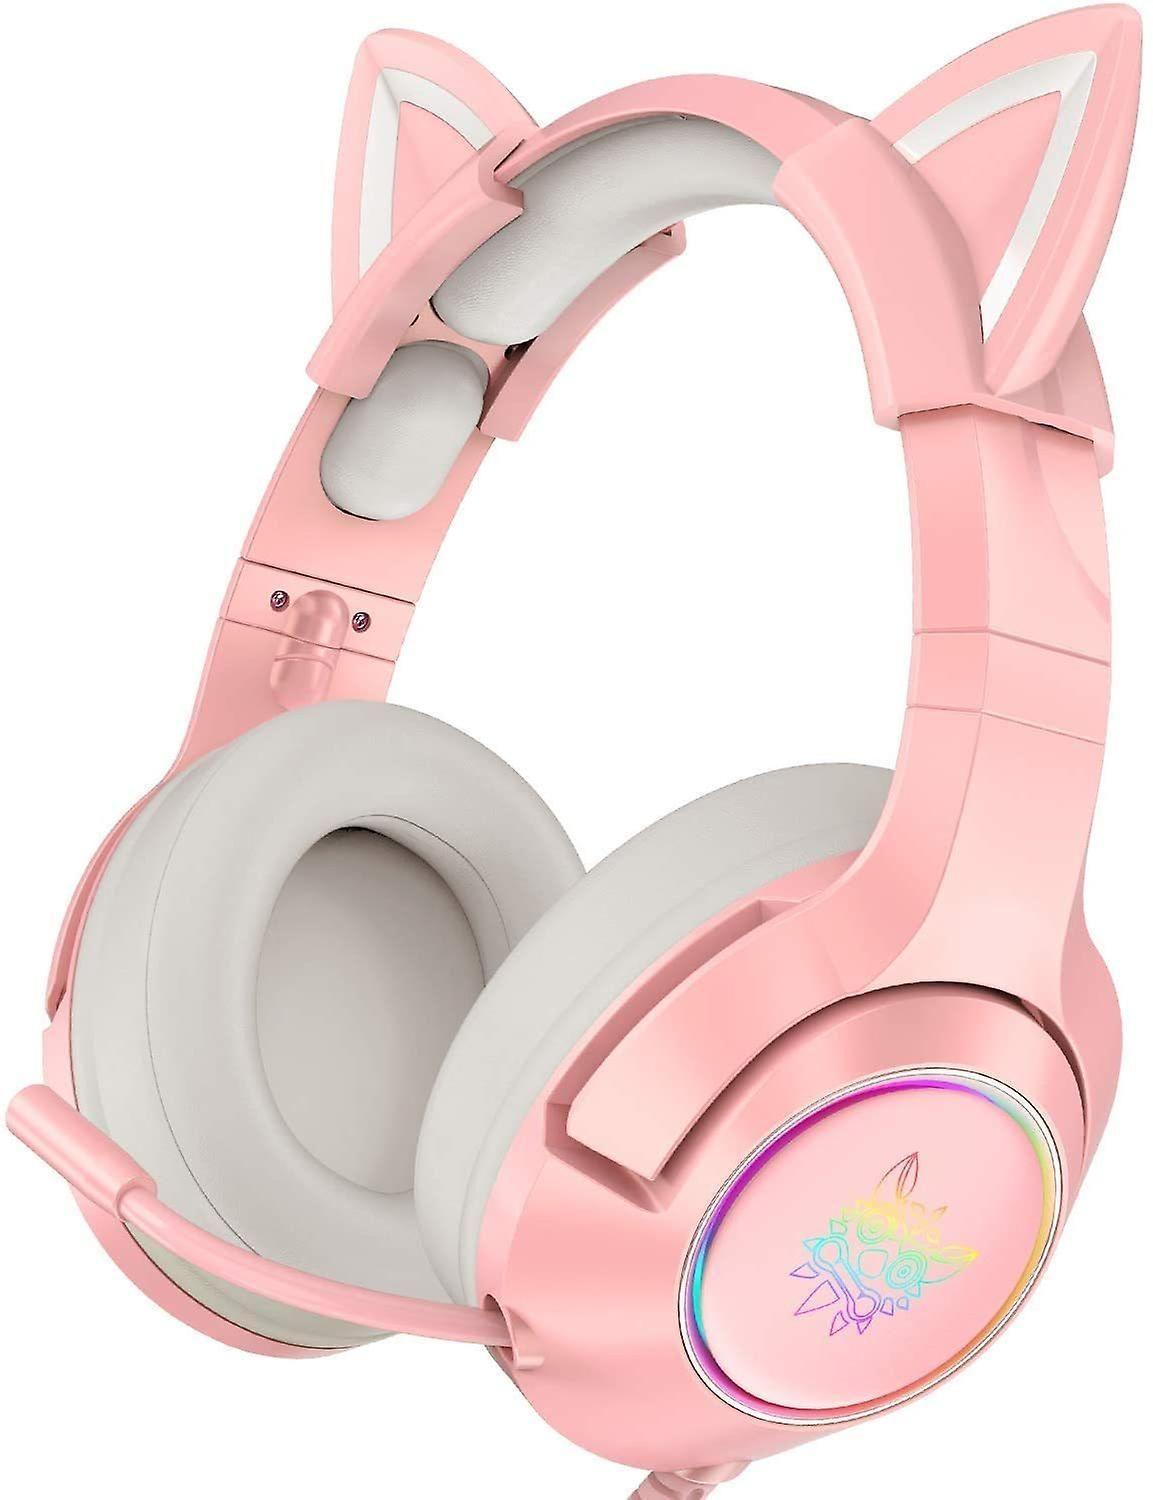 Pink Gaming Headset with Removable Cat Ears, for PS5, PS4, Xbox One (Adapter Not Included), Nintendo Switch, PC, with Surround Sound, RGB LED Light Noise Canceling Retractable Microphone(Pink)